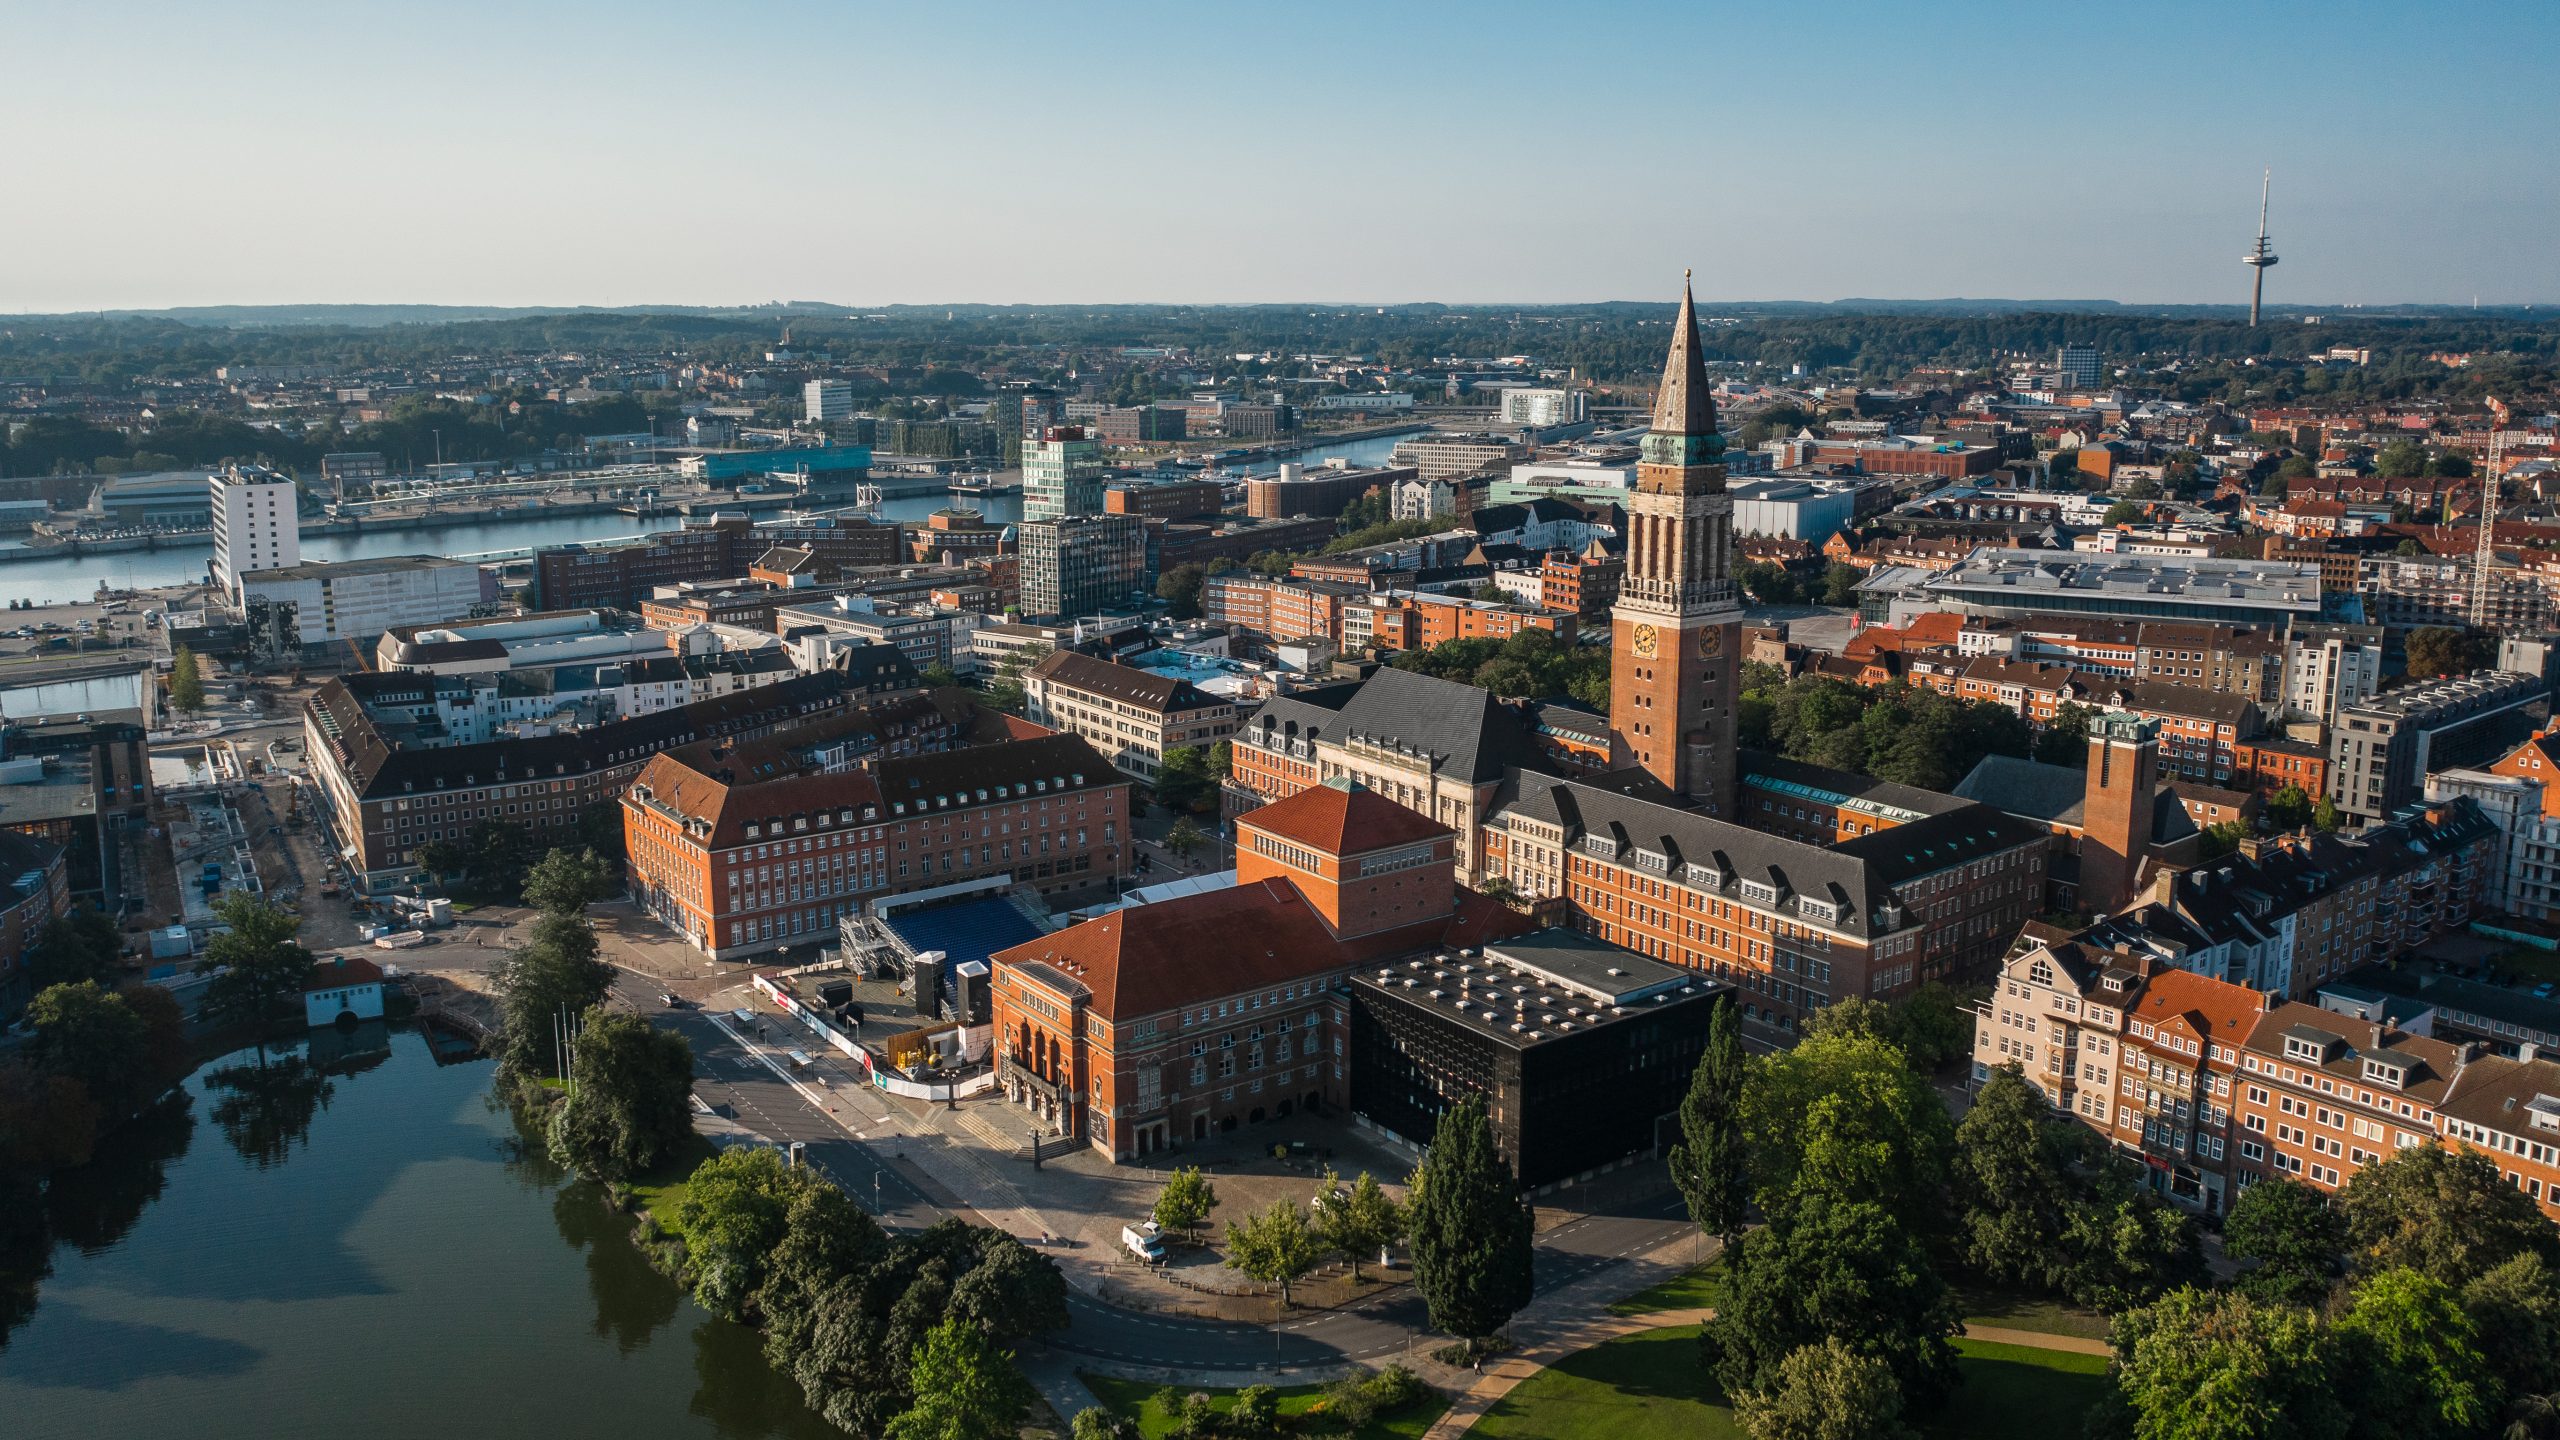 Cityscape of Kiel, the city in the northern part of Germany